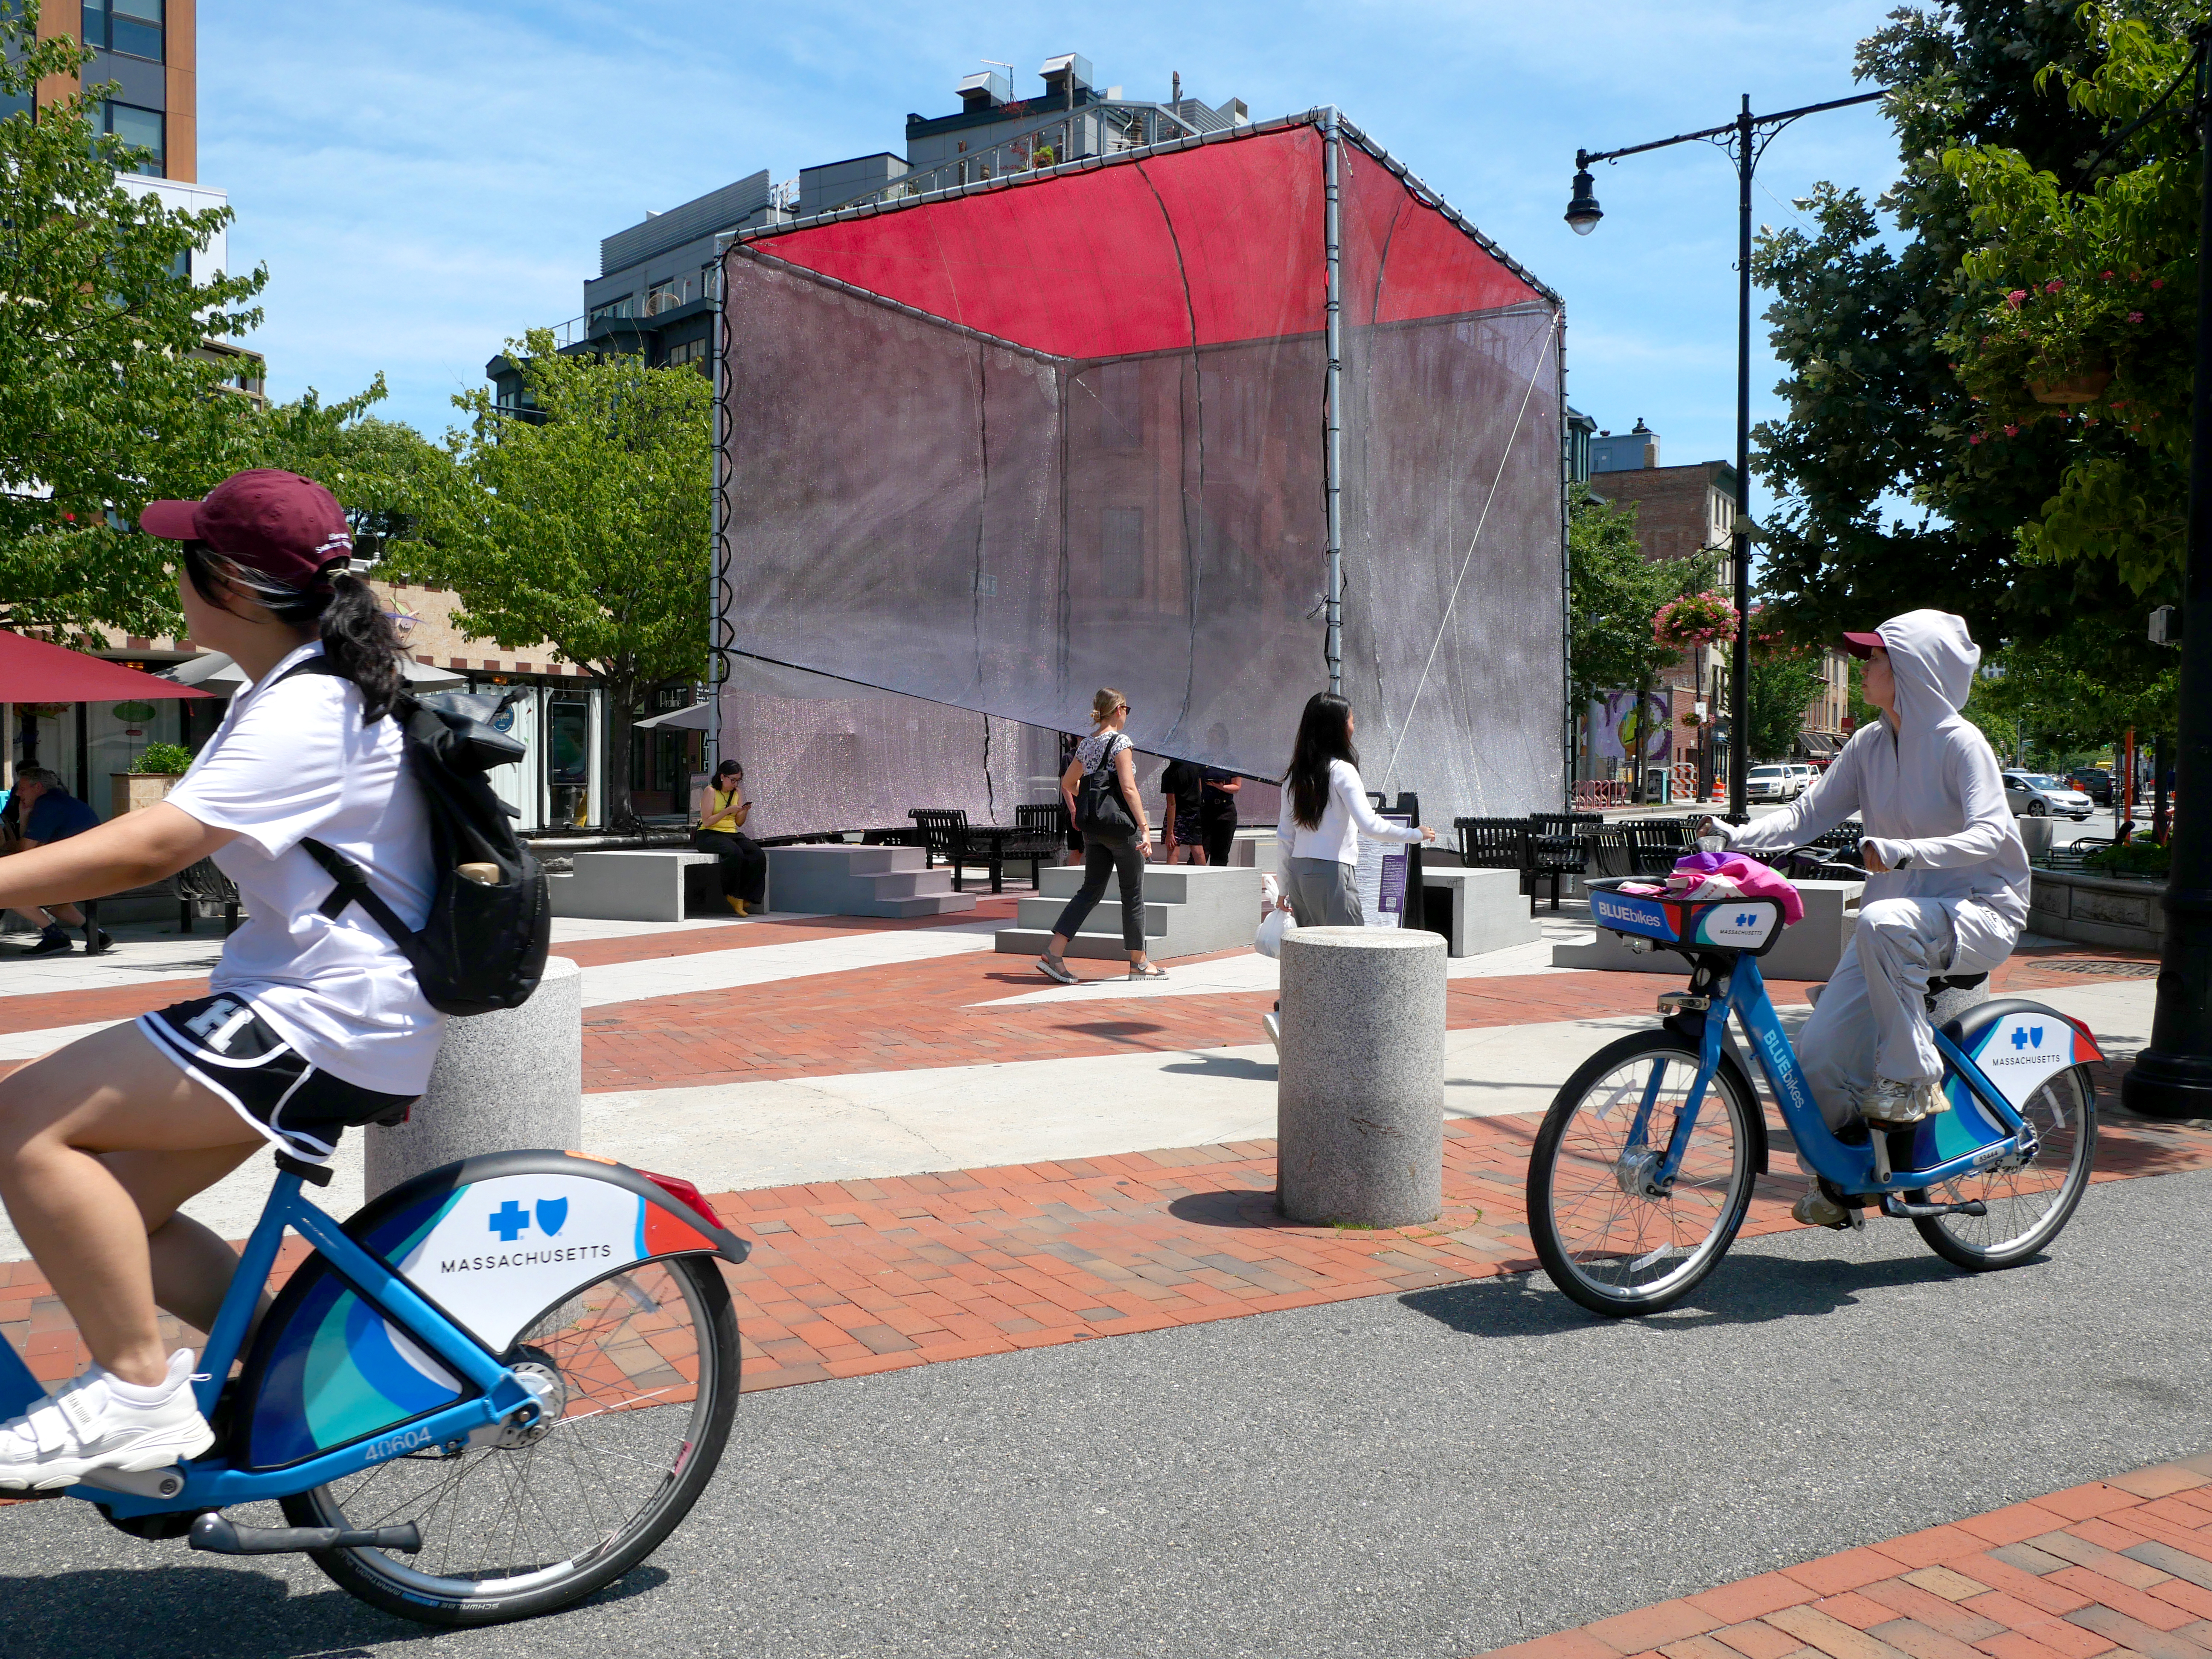 local plaza with a shade structure and bicycles passing by